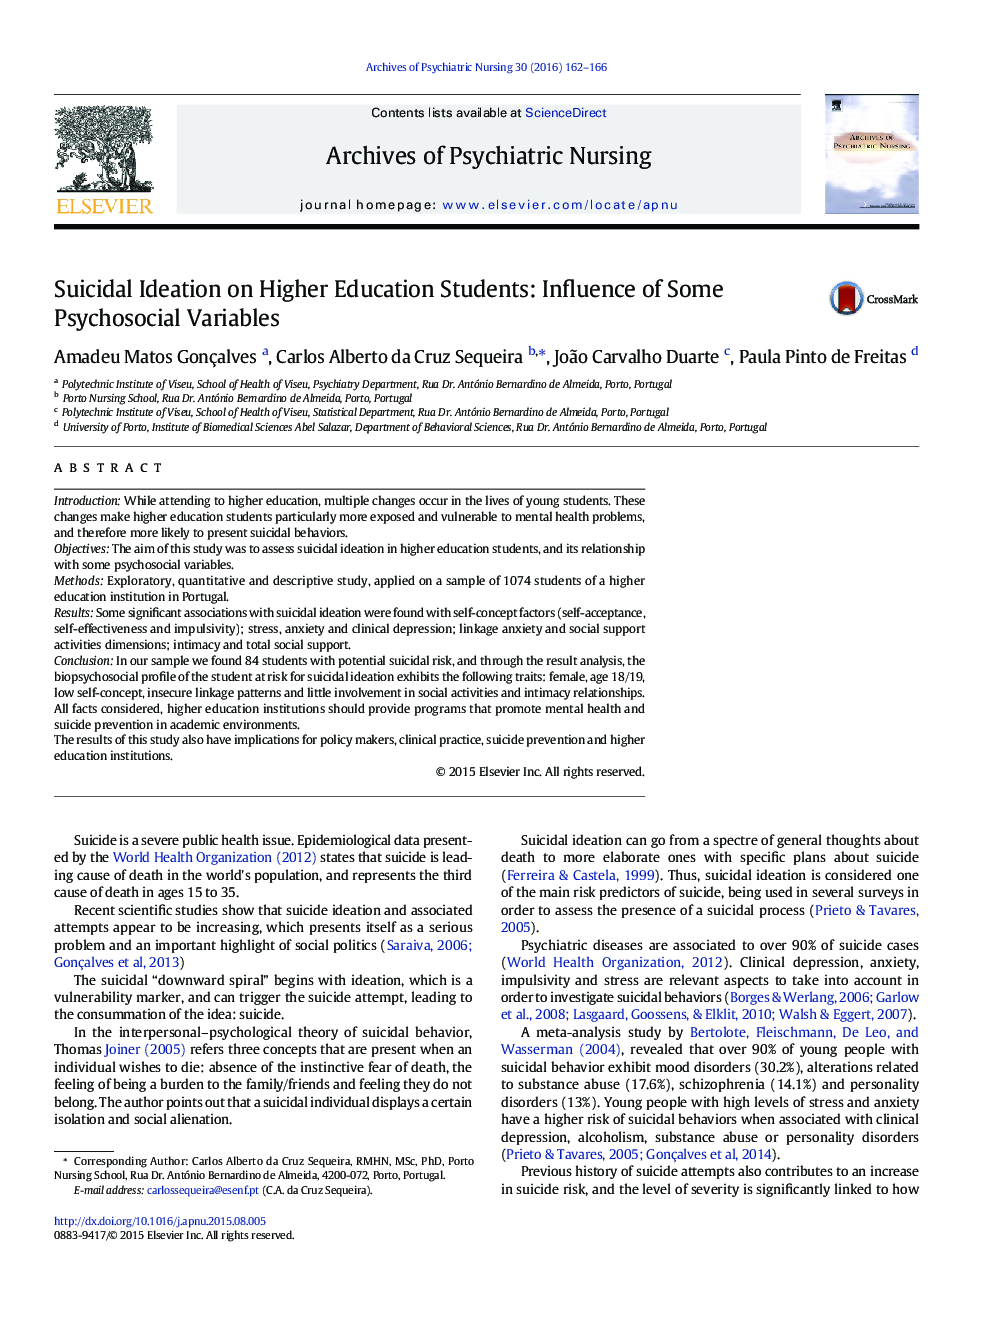 Suicidal Ideation on Higher Education Students: Influence of Some Psychosocial Variables